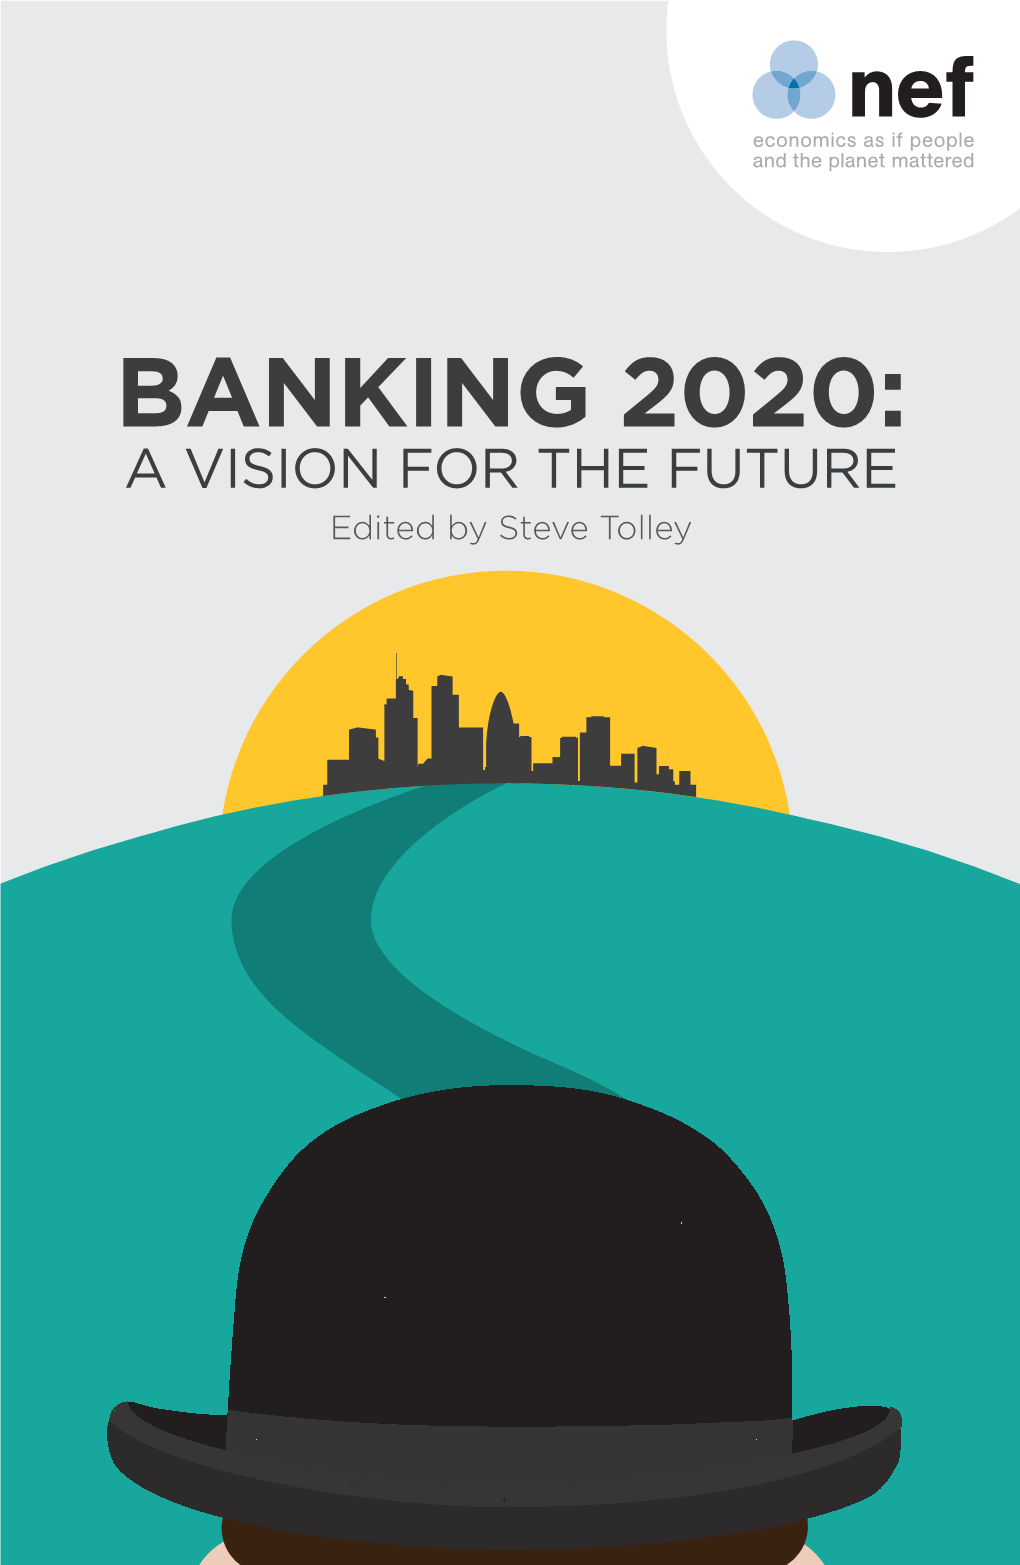 9781908506368 Banking 2020 (734H) 2.Indd Viii 14/05/2013 12:06:34 BANKING 2020: a VISION for the FUTURE